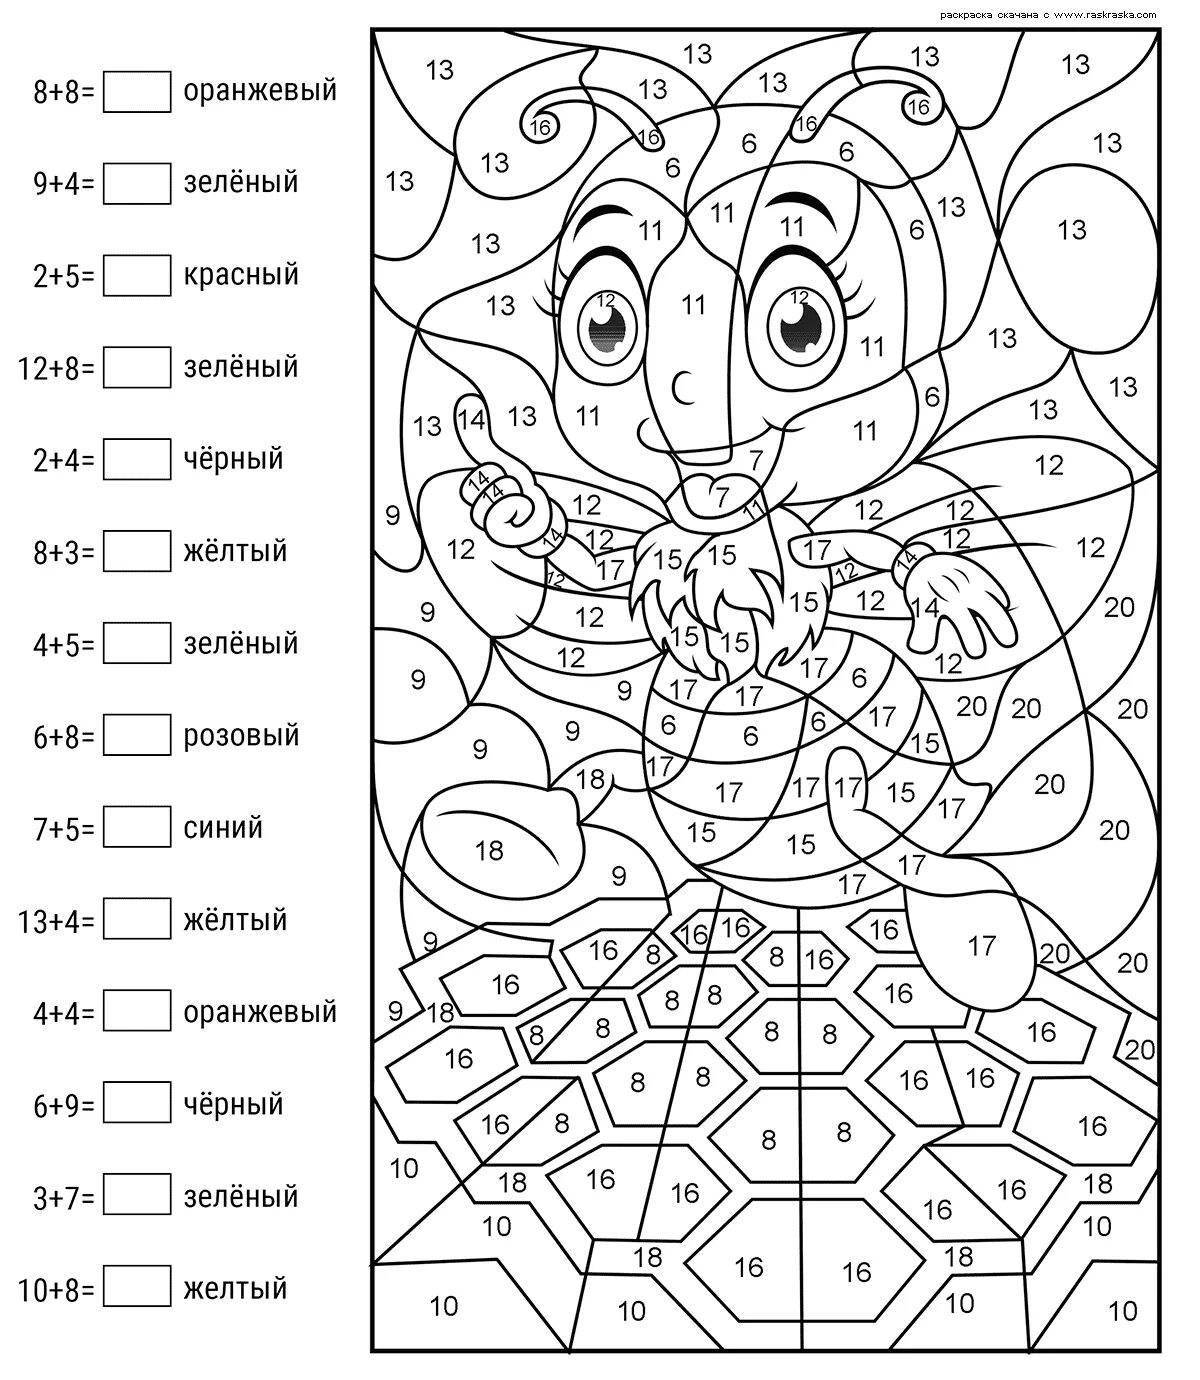 Stimulating coloring book with math examples